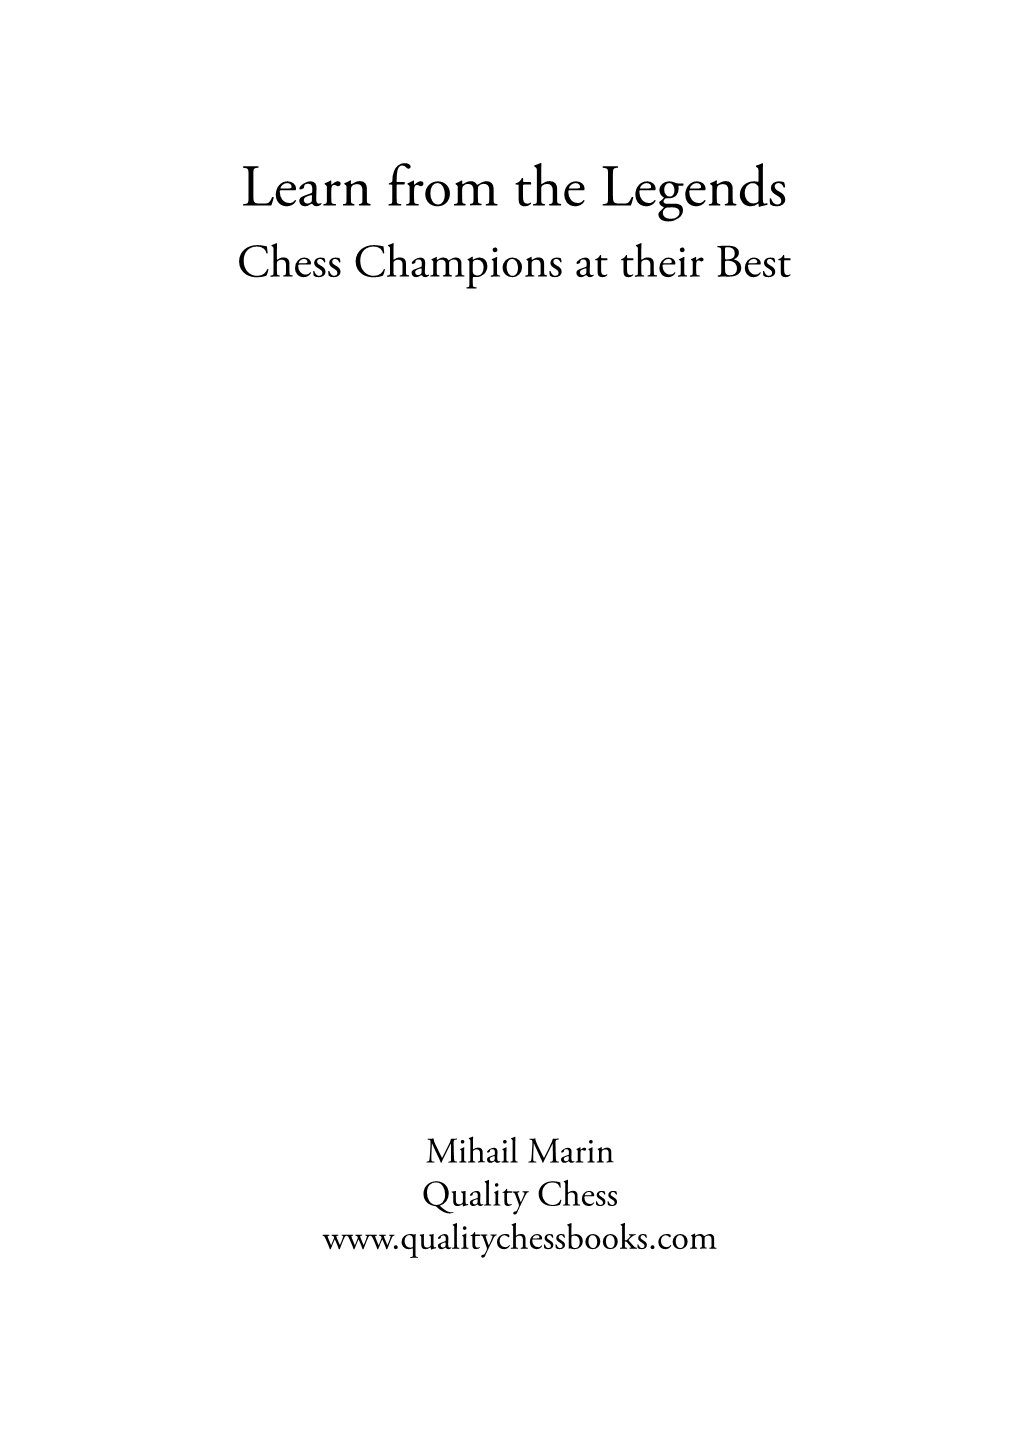 Learn from the Legends Chess Champions at Their Best